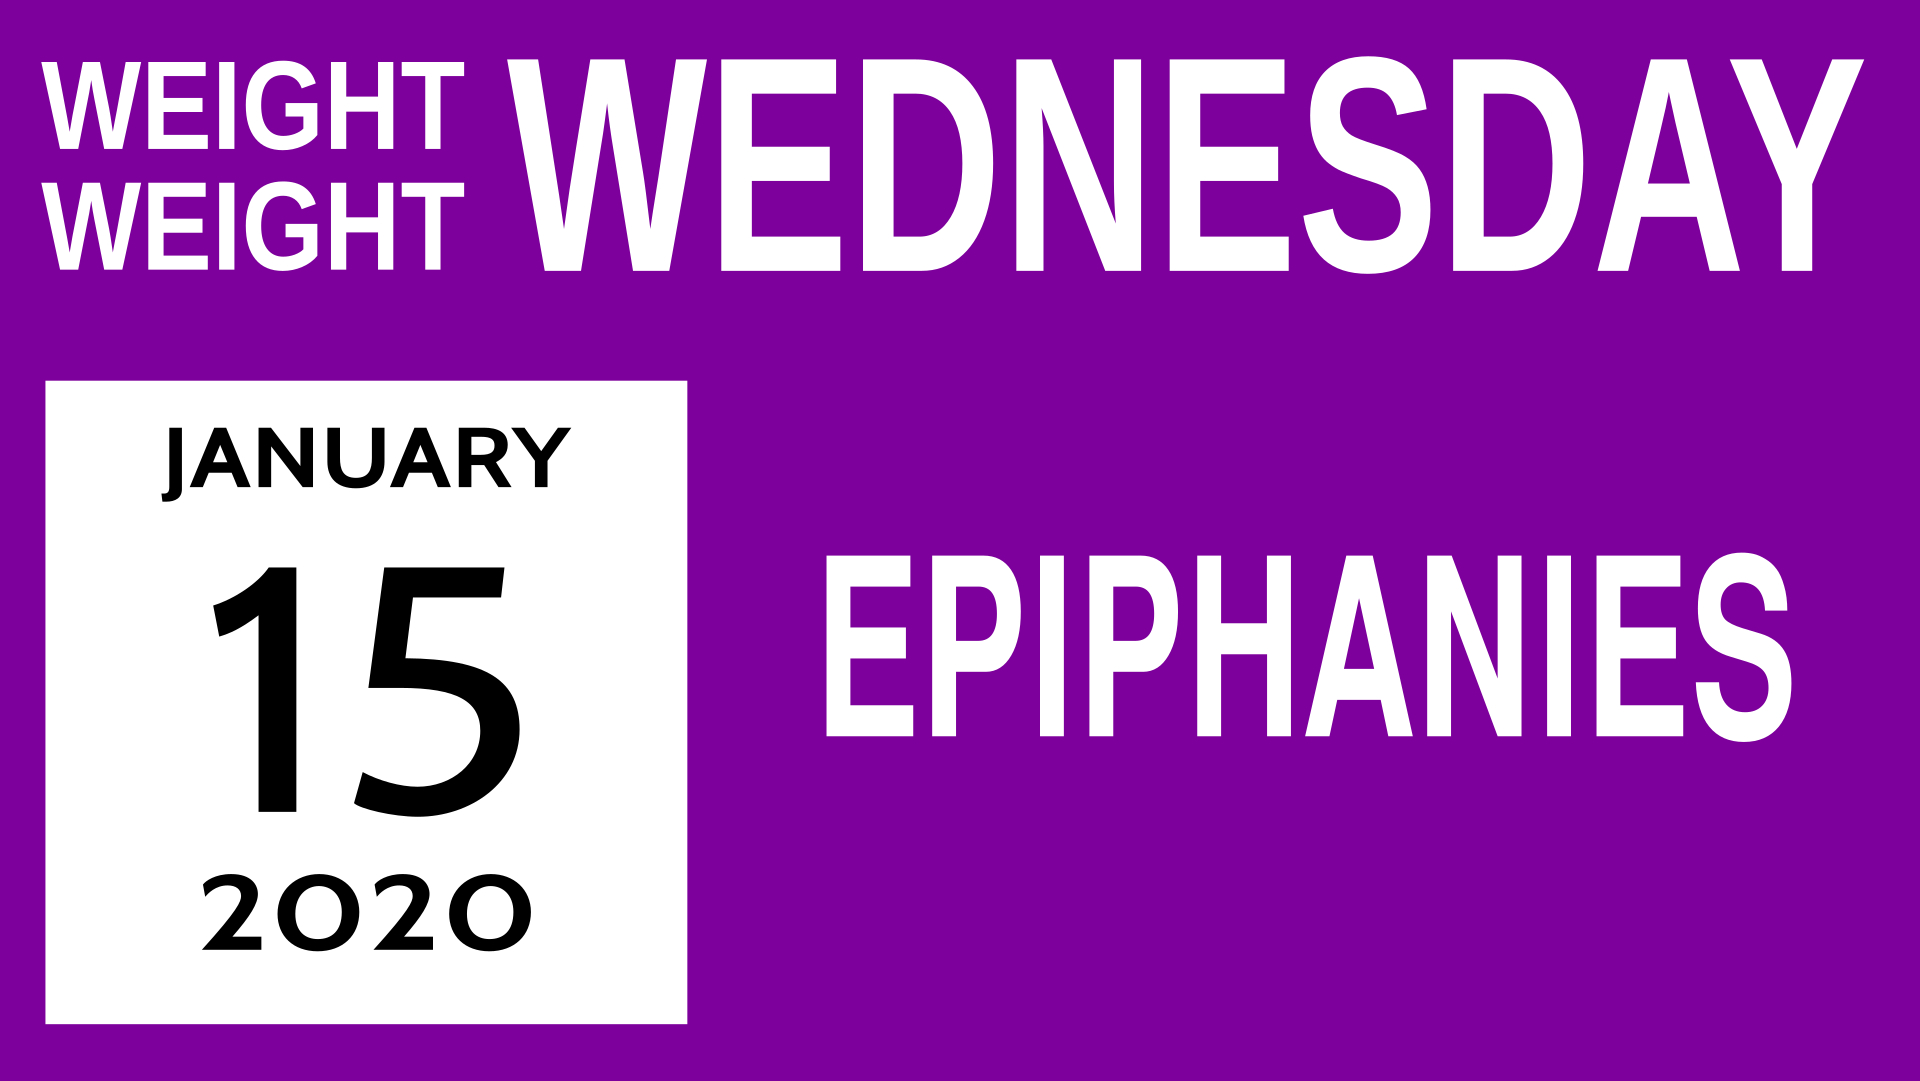 Weight Weight Wednesday 3: Epiphanies